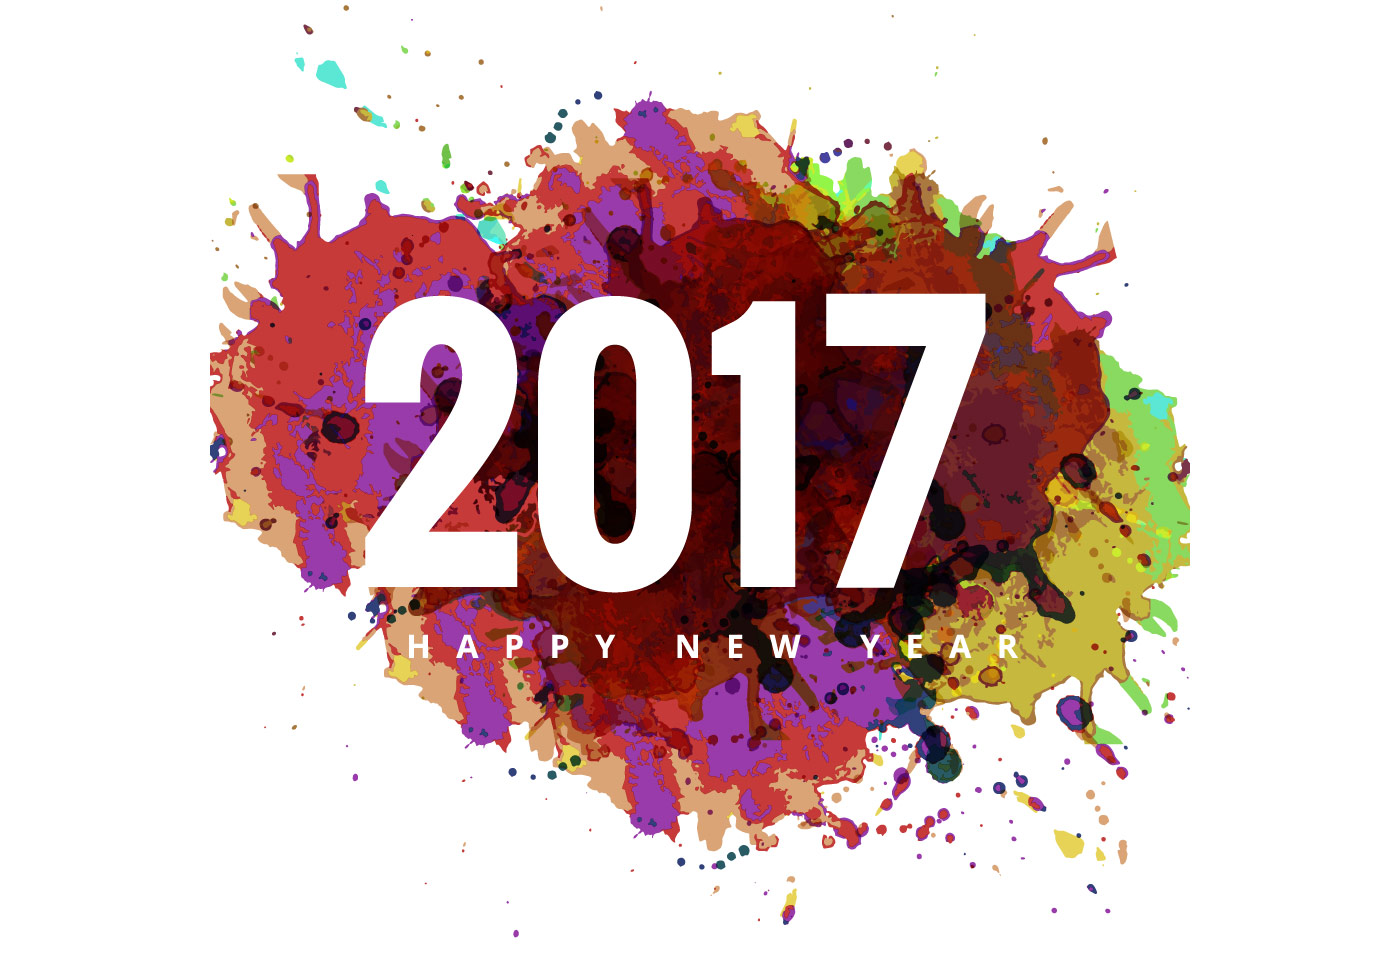 If you ve any trouble finding just e to our blog Happy new year pictures 2017 and your best wishes which you can send to your loved ones this new